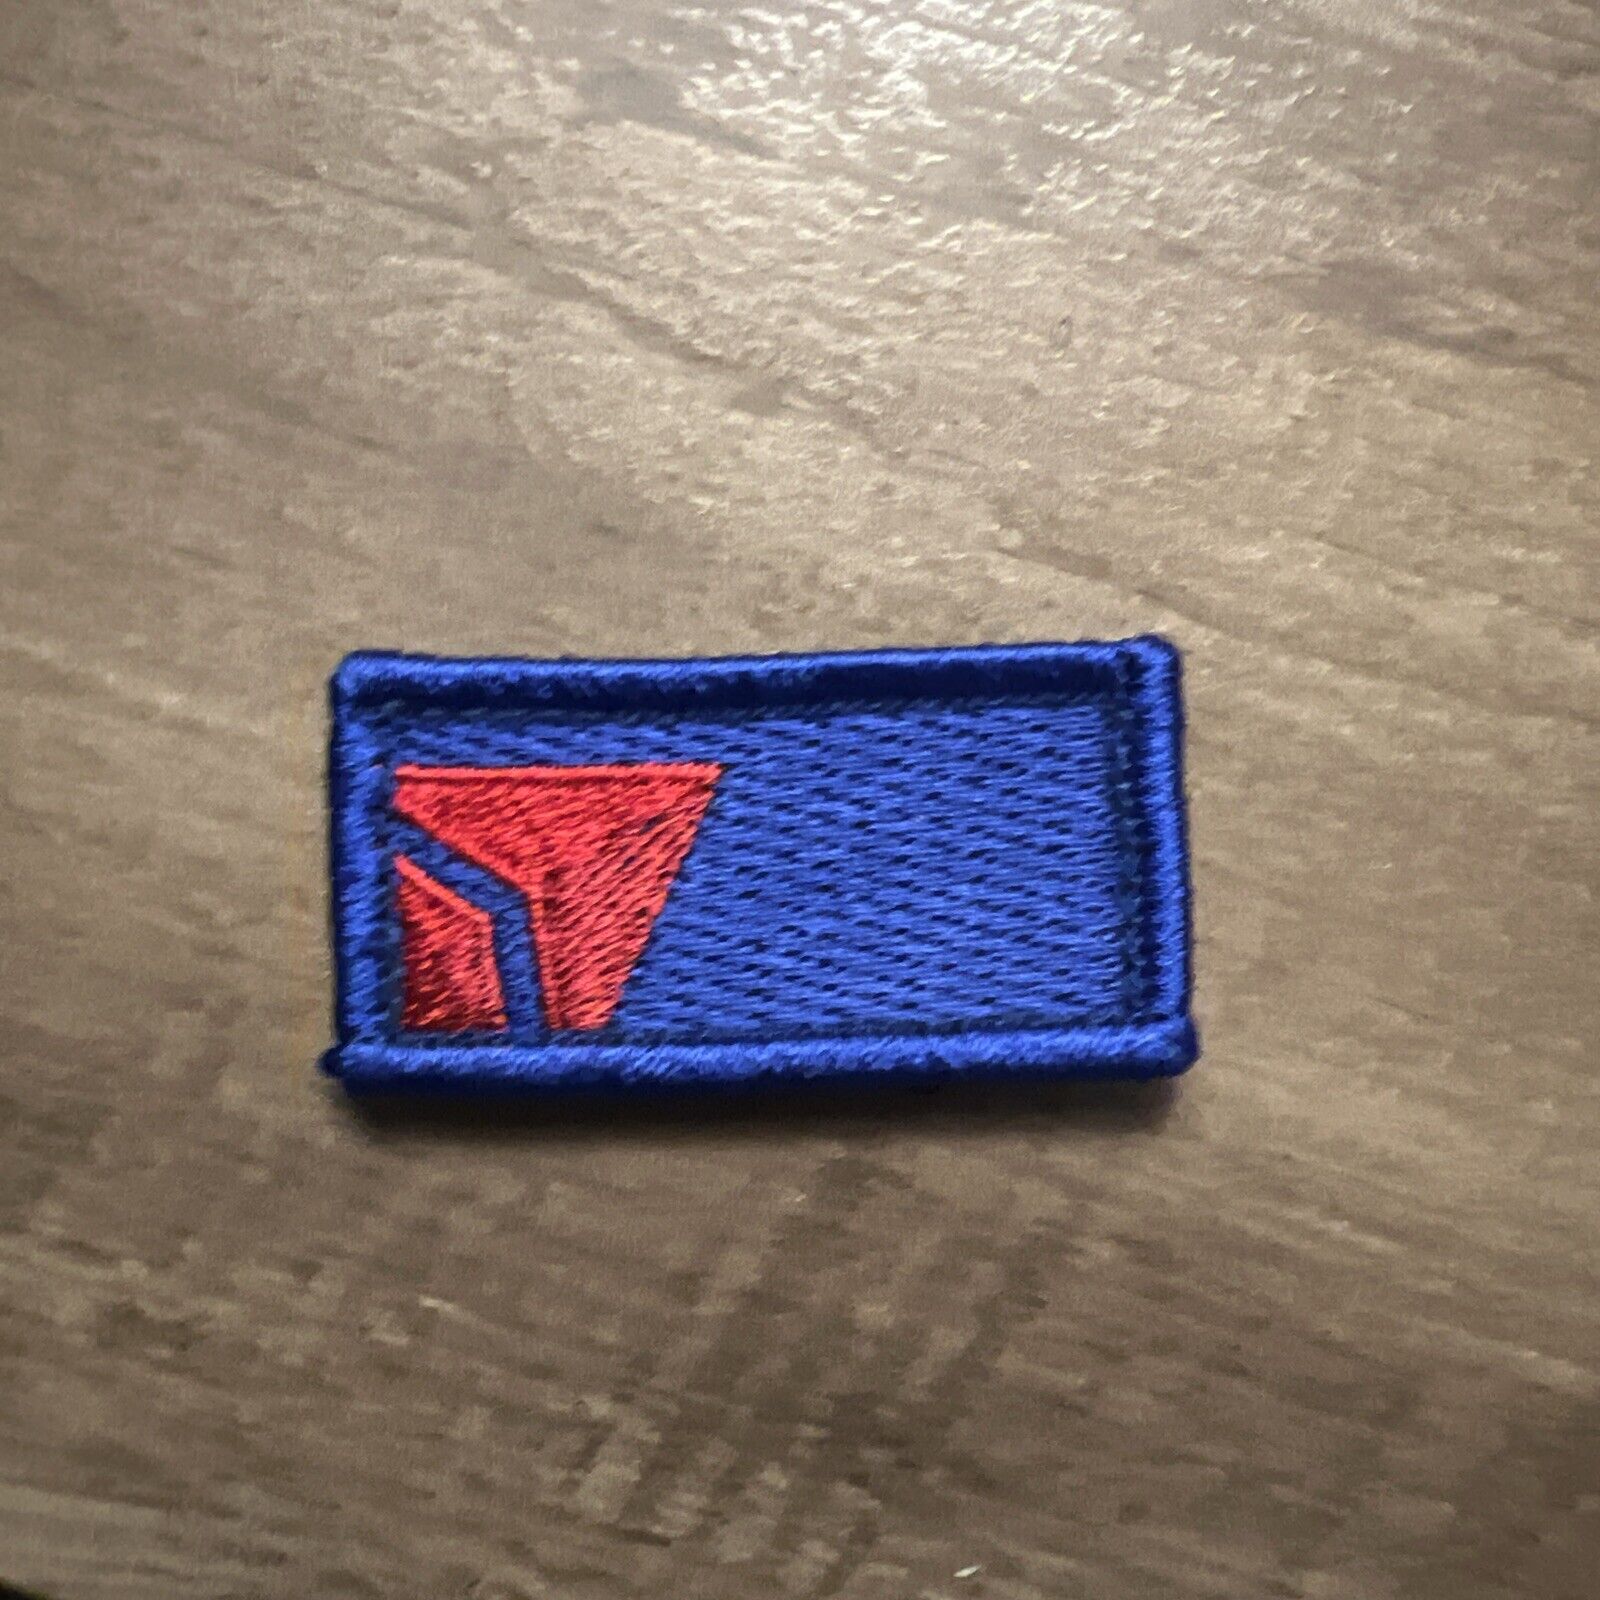 Delta airlines widget pen tab patch military